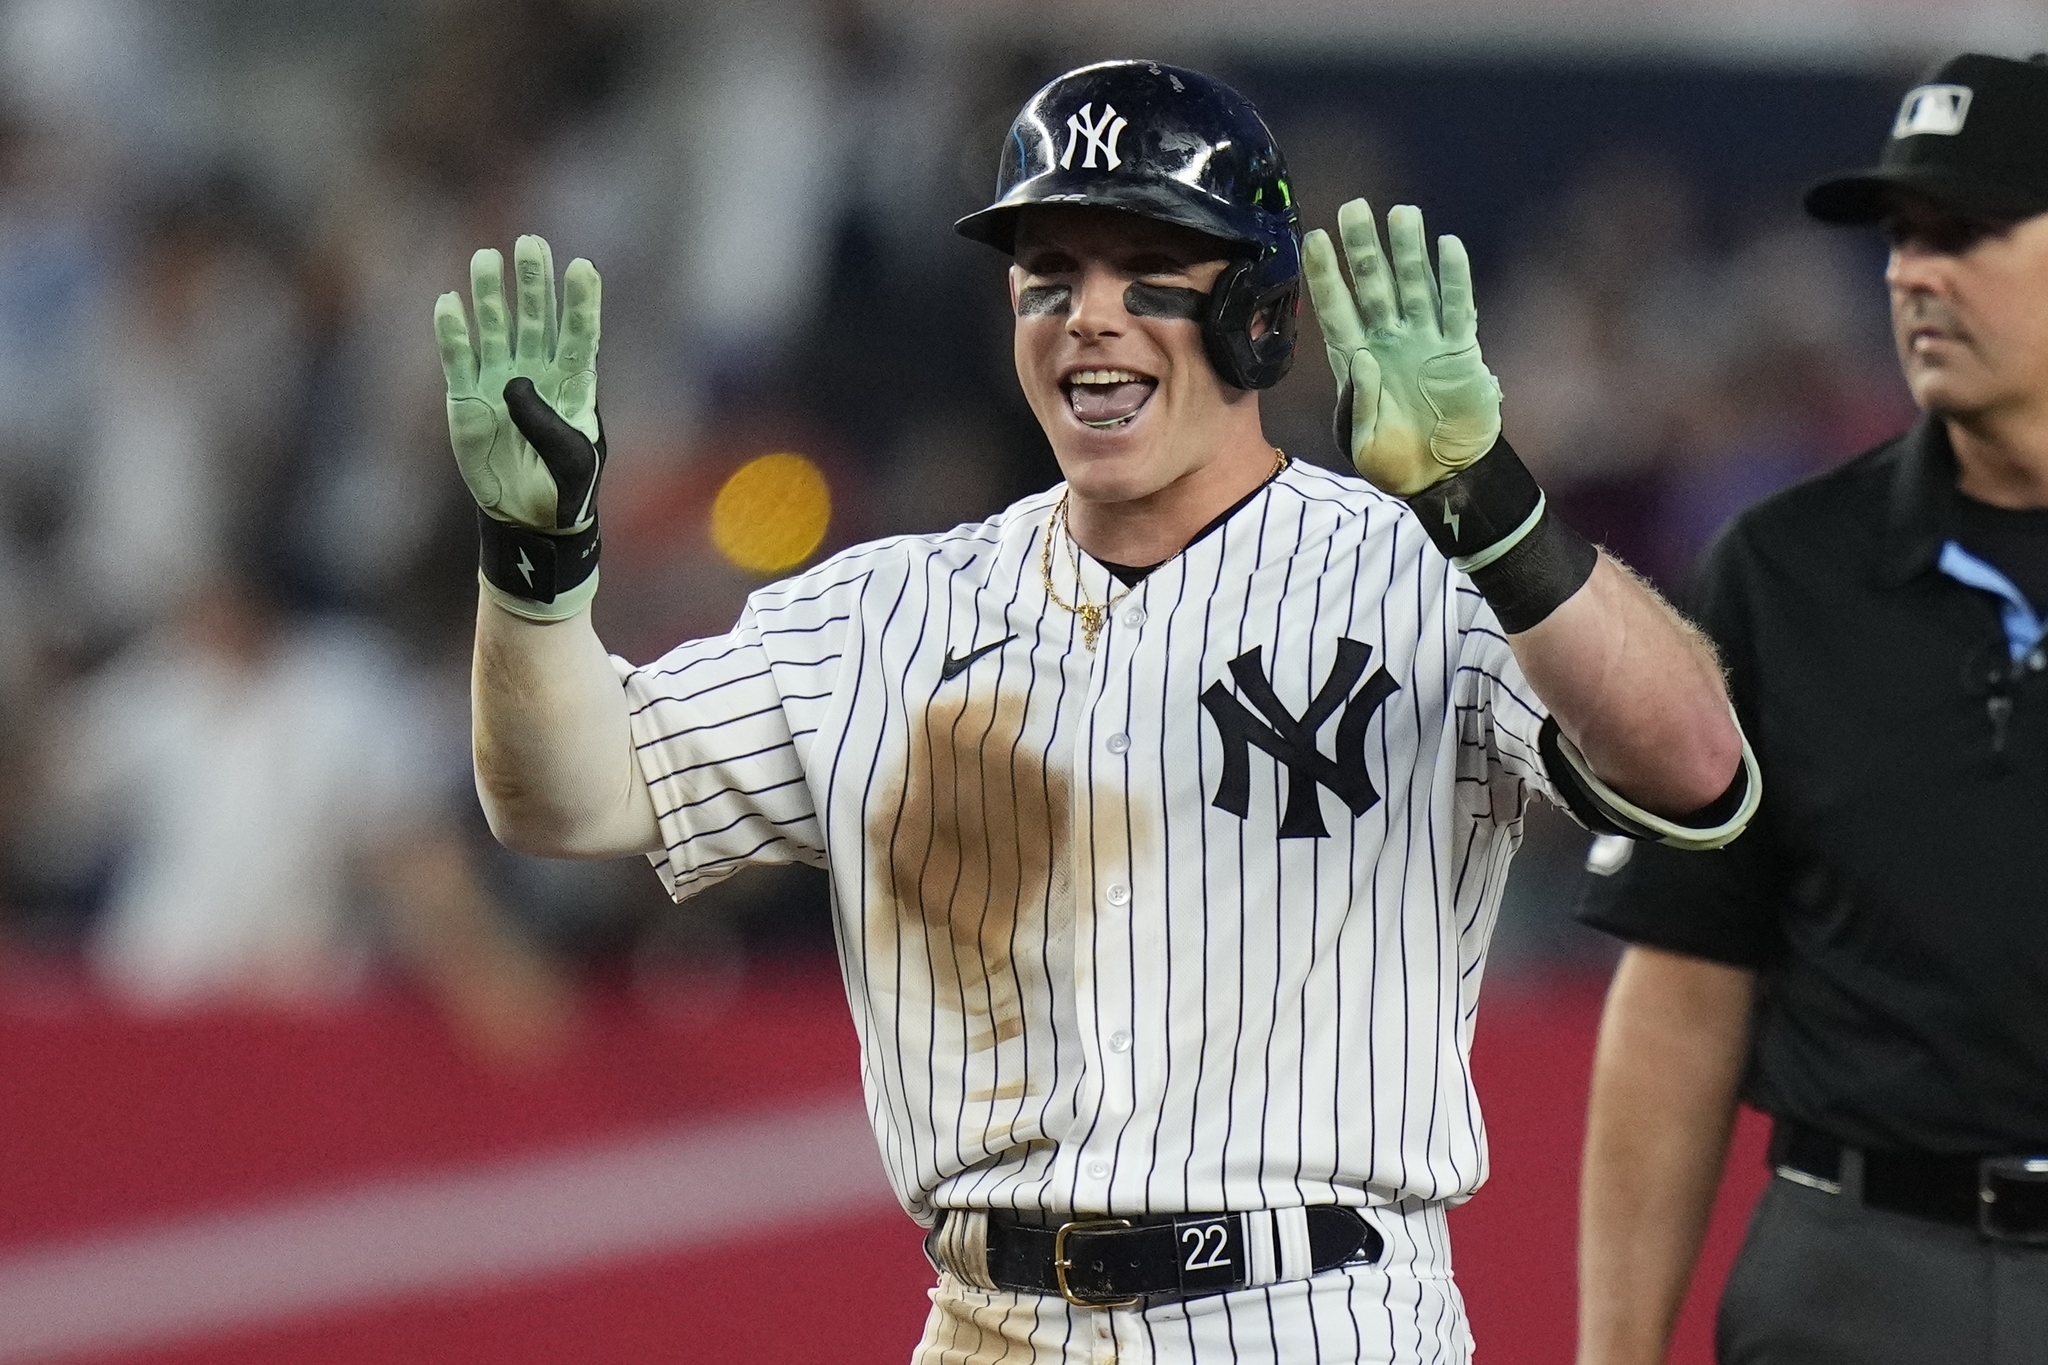 Harrison Bader with the Yankees